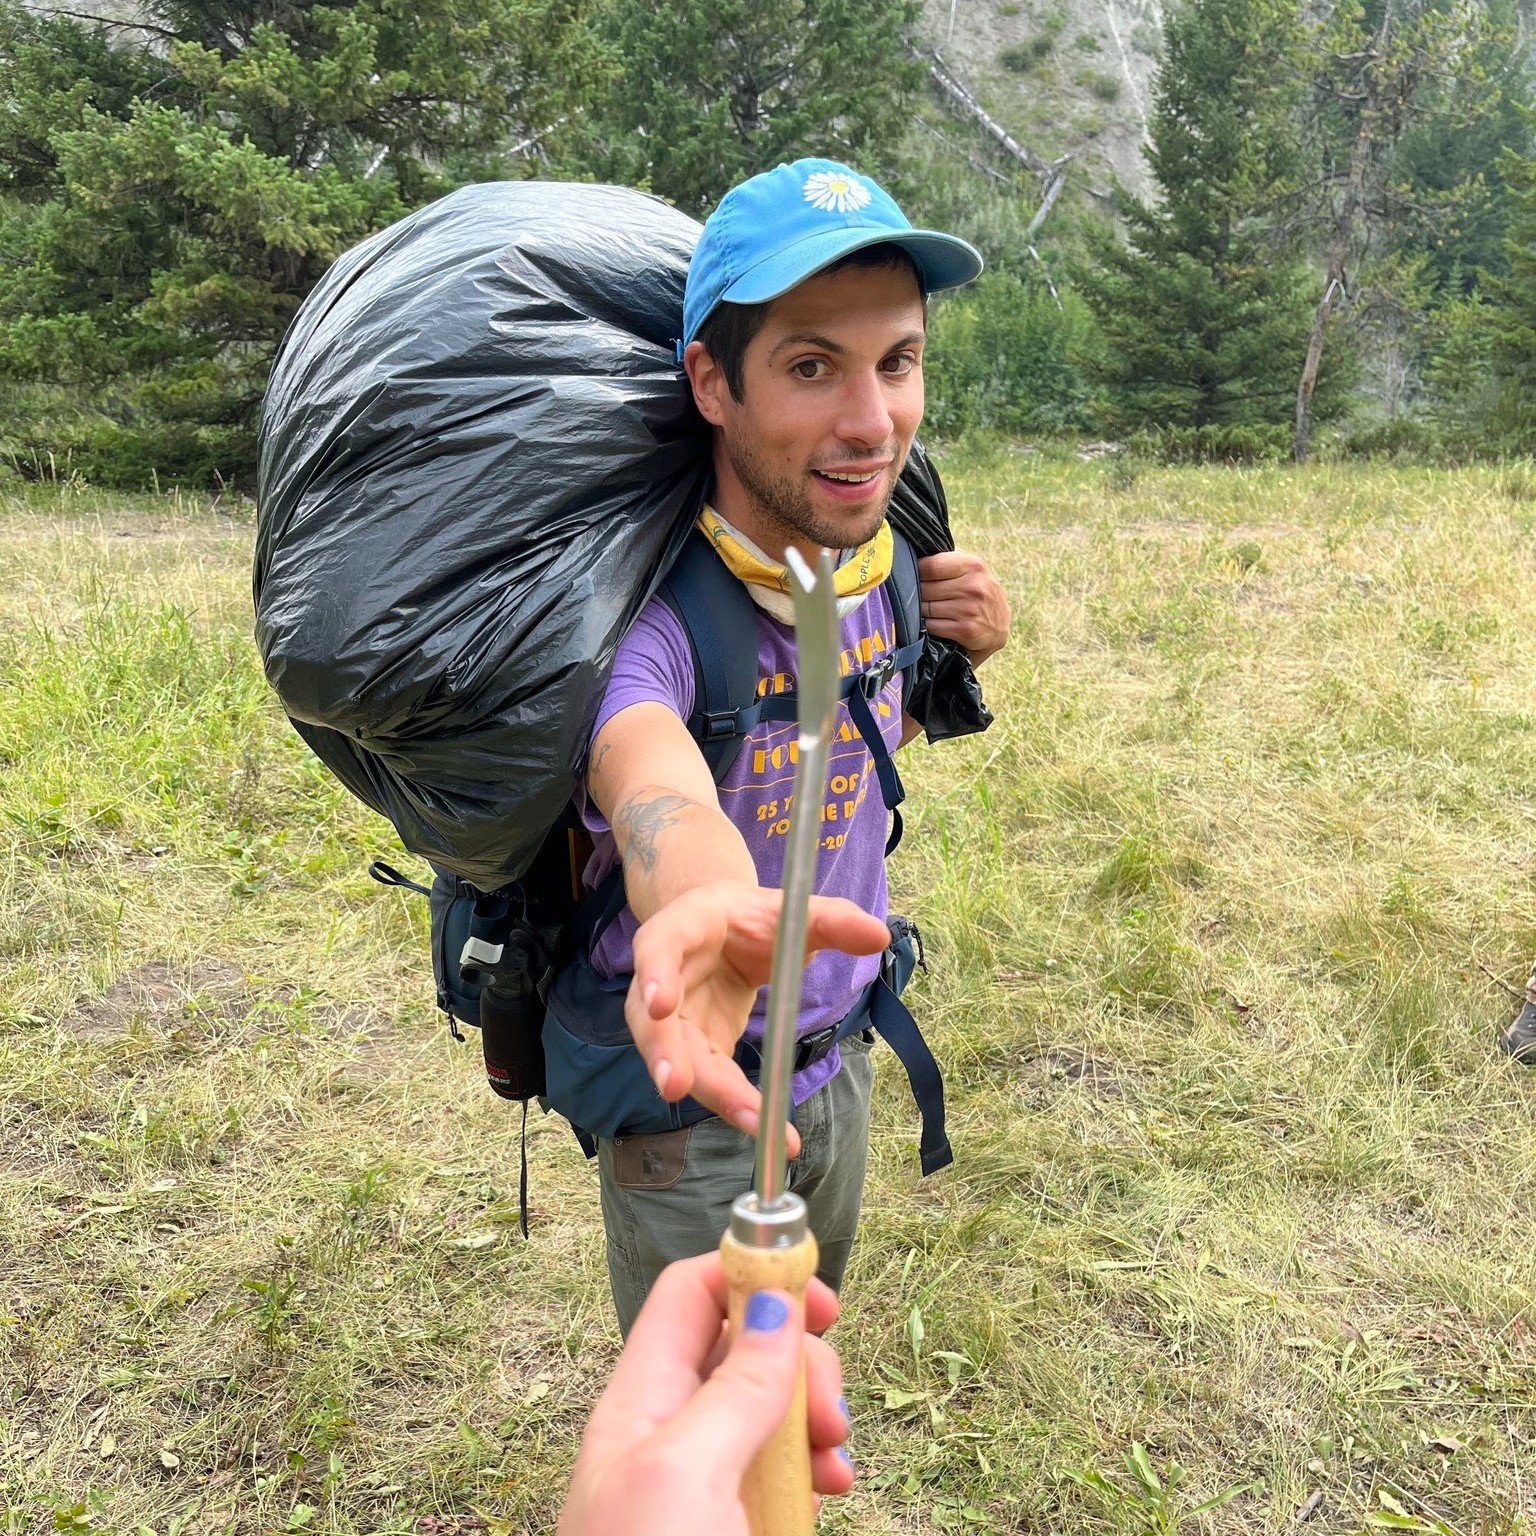 This week we have two awesome opportunities in Missoula to learn more about invasive plants straight from our weeds-aficionado himself, Zack Schlanger. 

Tomorrow, Tuesday May 14th from 6-7 PM, join us at the Missoula Public Library to hear from Zack